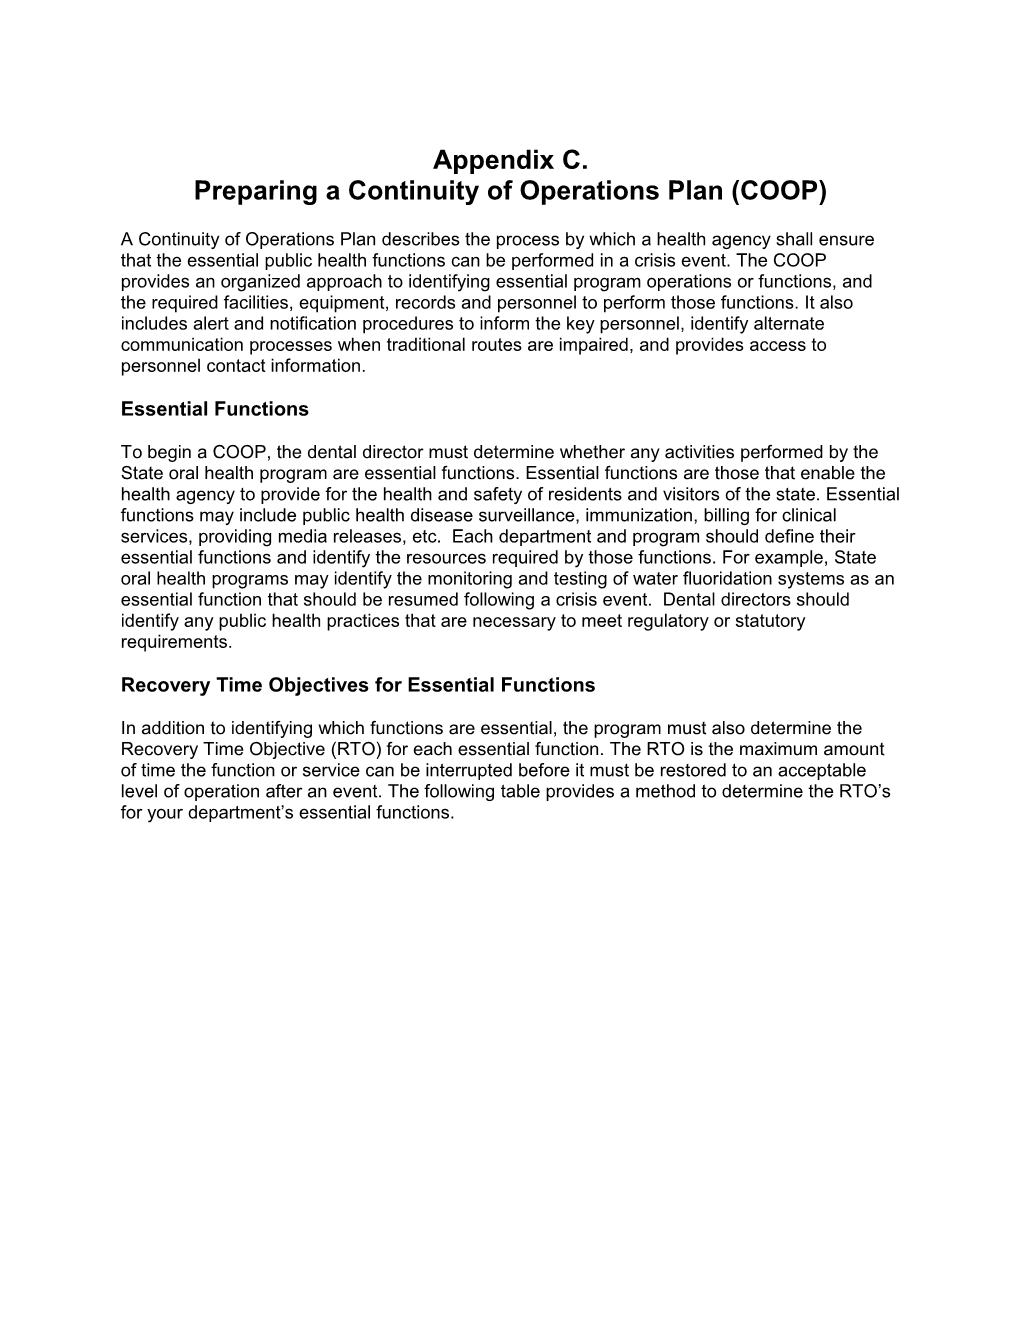 Preparing a Continuity of Operations Plan (COOP)